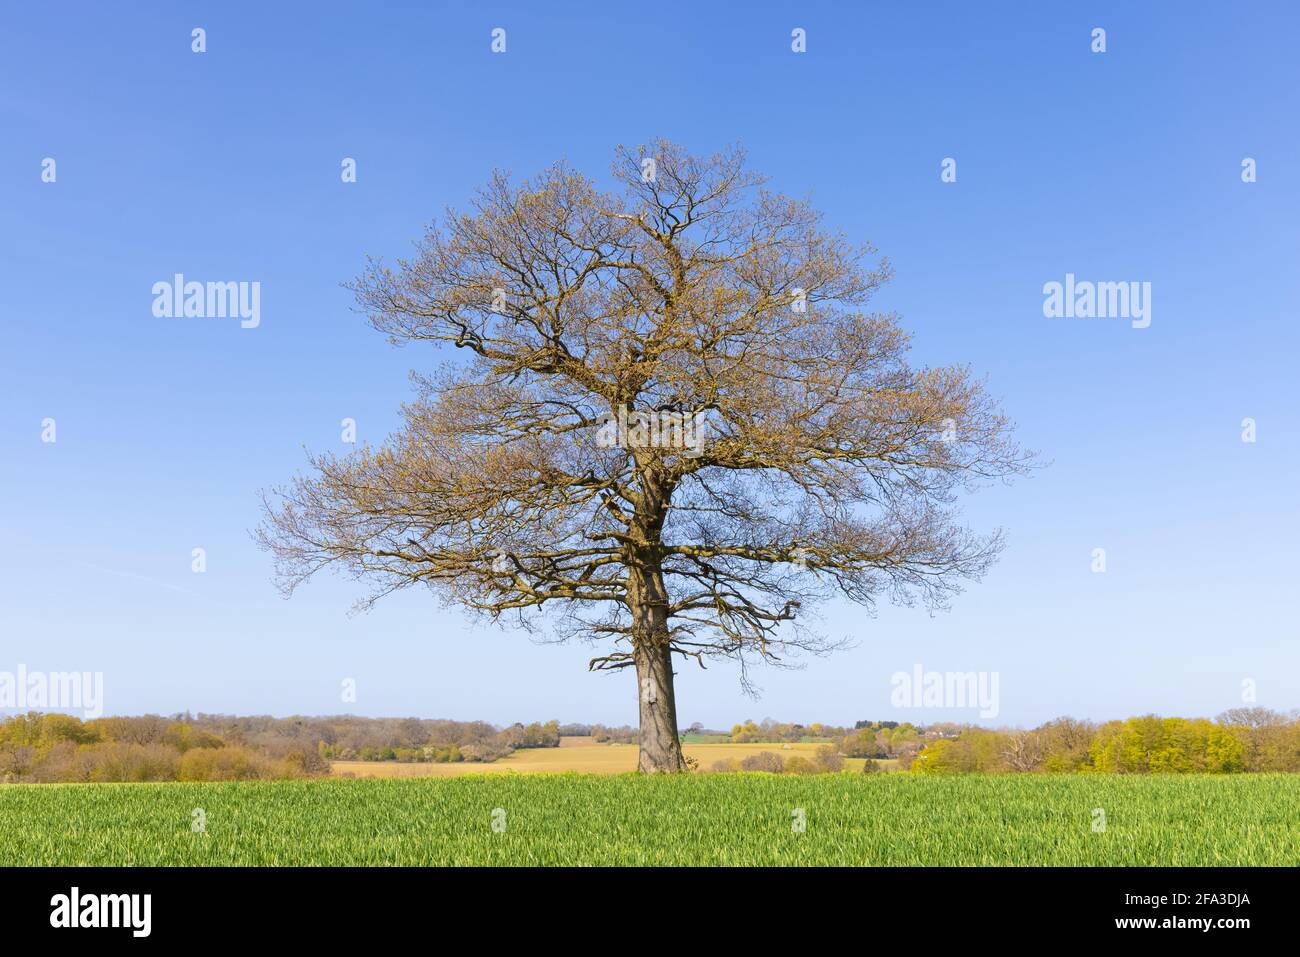 Solitary oak tree in a field on a sunny spring day with blue sky and young shoots of wheat in the foreground. Hertfordshire. UK Stock Photo